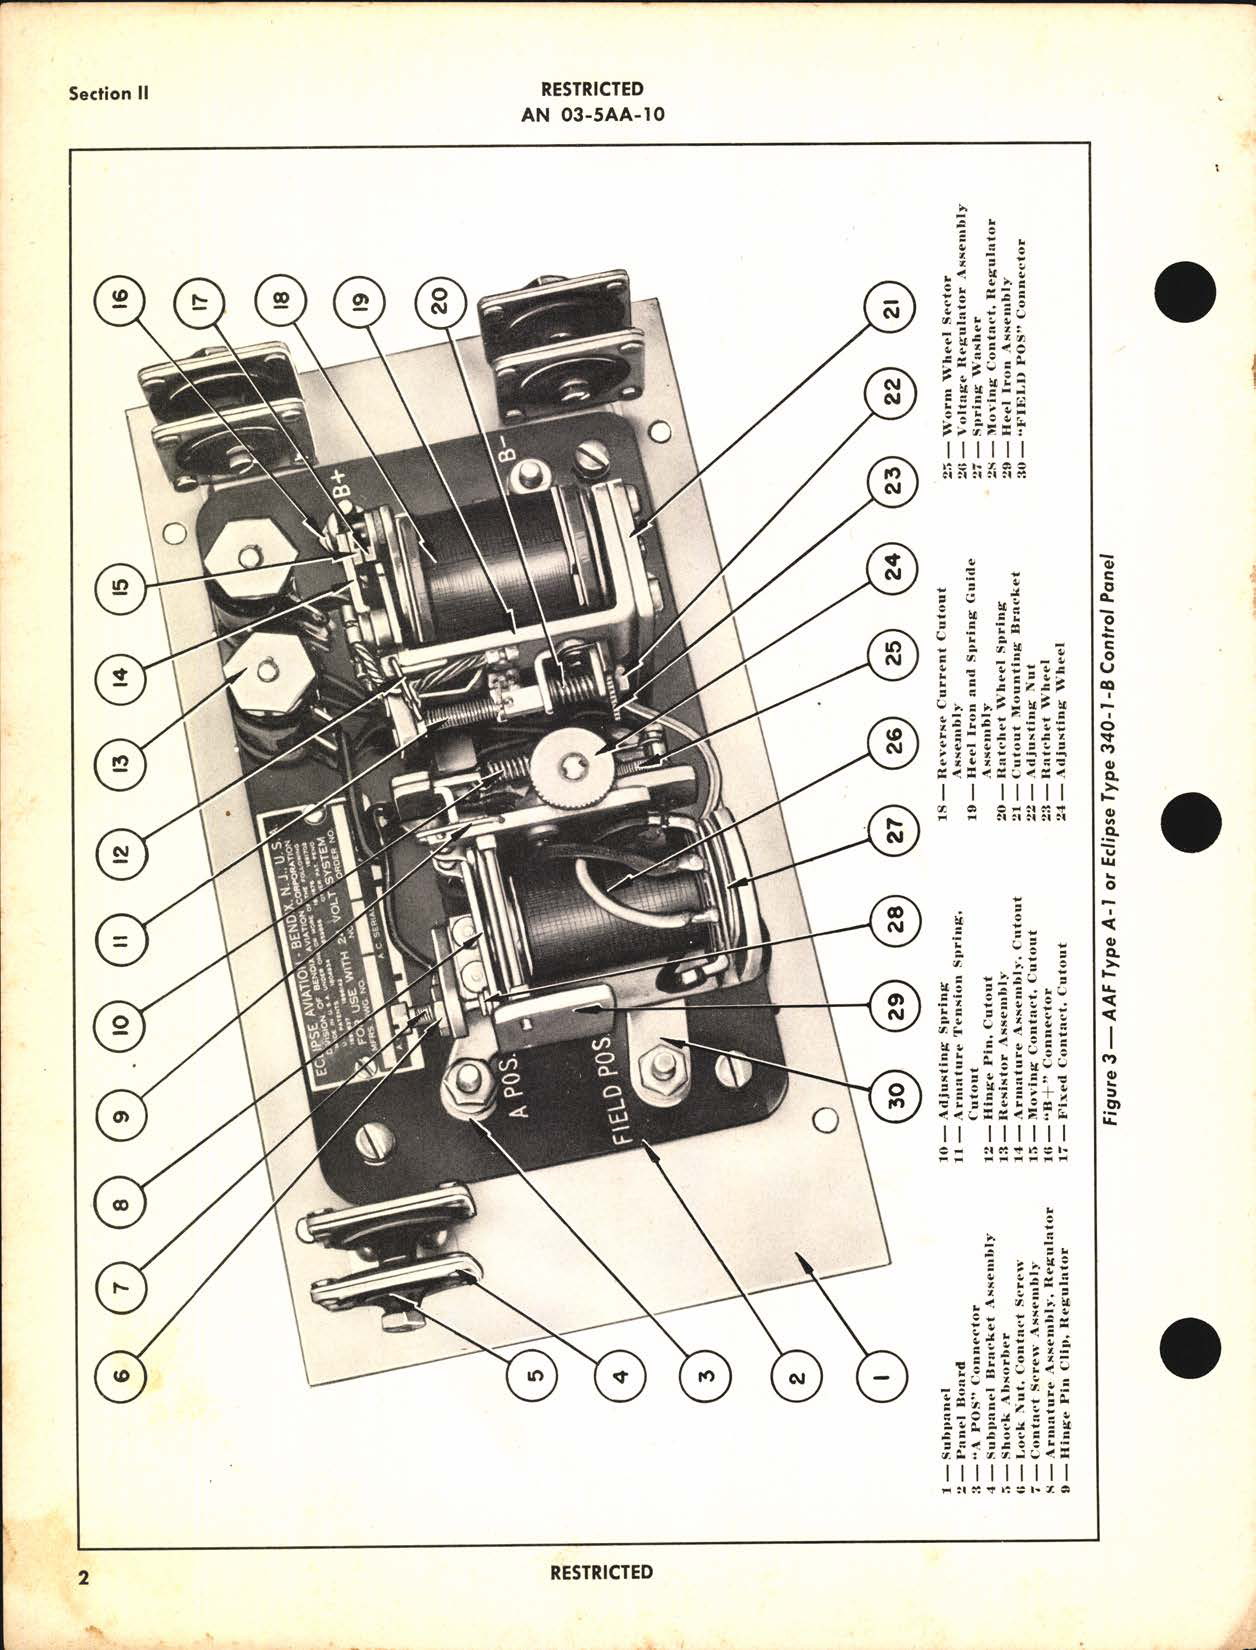 Sample page 6 from AirCorps Library document: Handbook of Instructions with Parts Catalog for Types 323 and 340 D-C Generator Control Panels